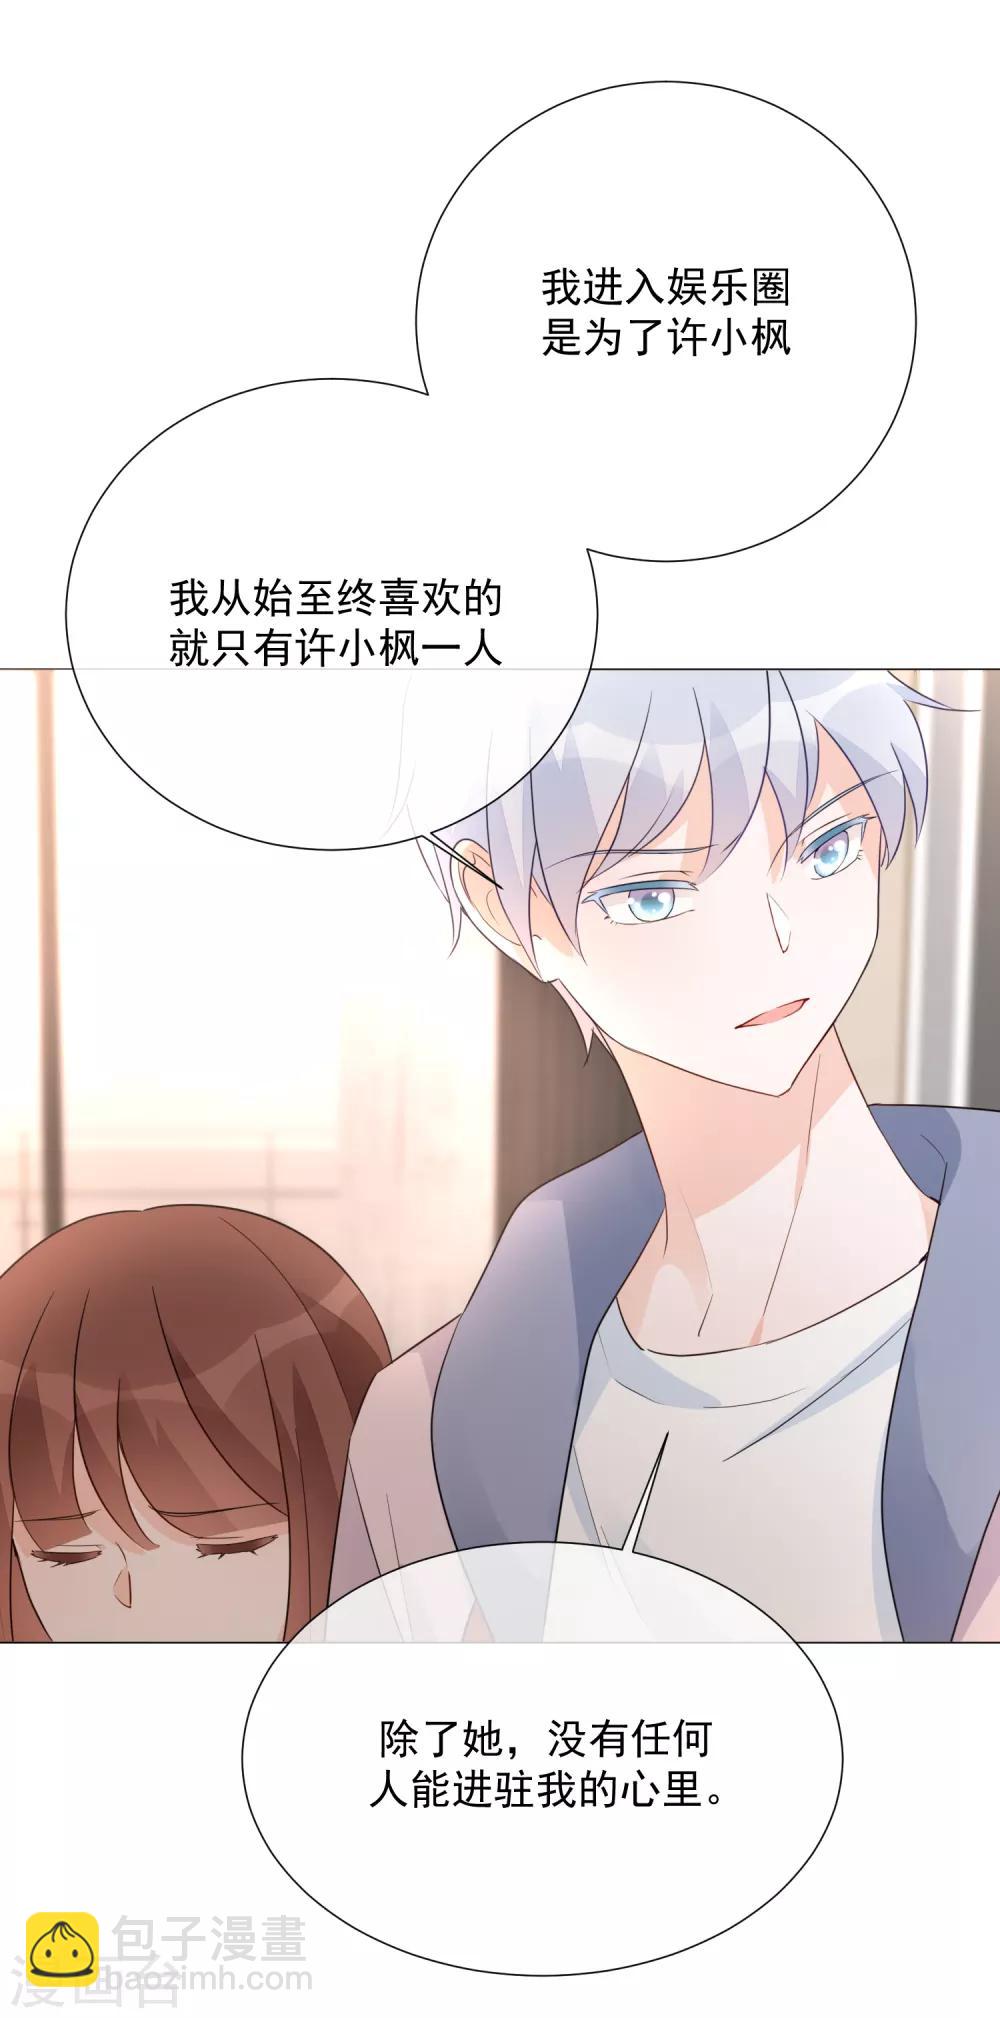 One Kiss A Day - 第89话 勇敢面对 - 2